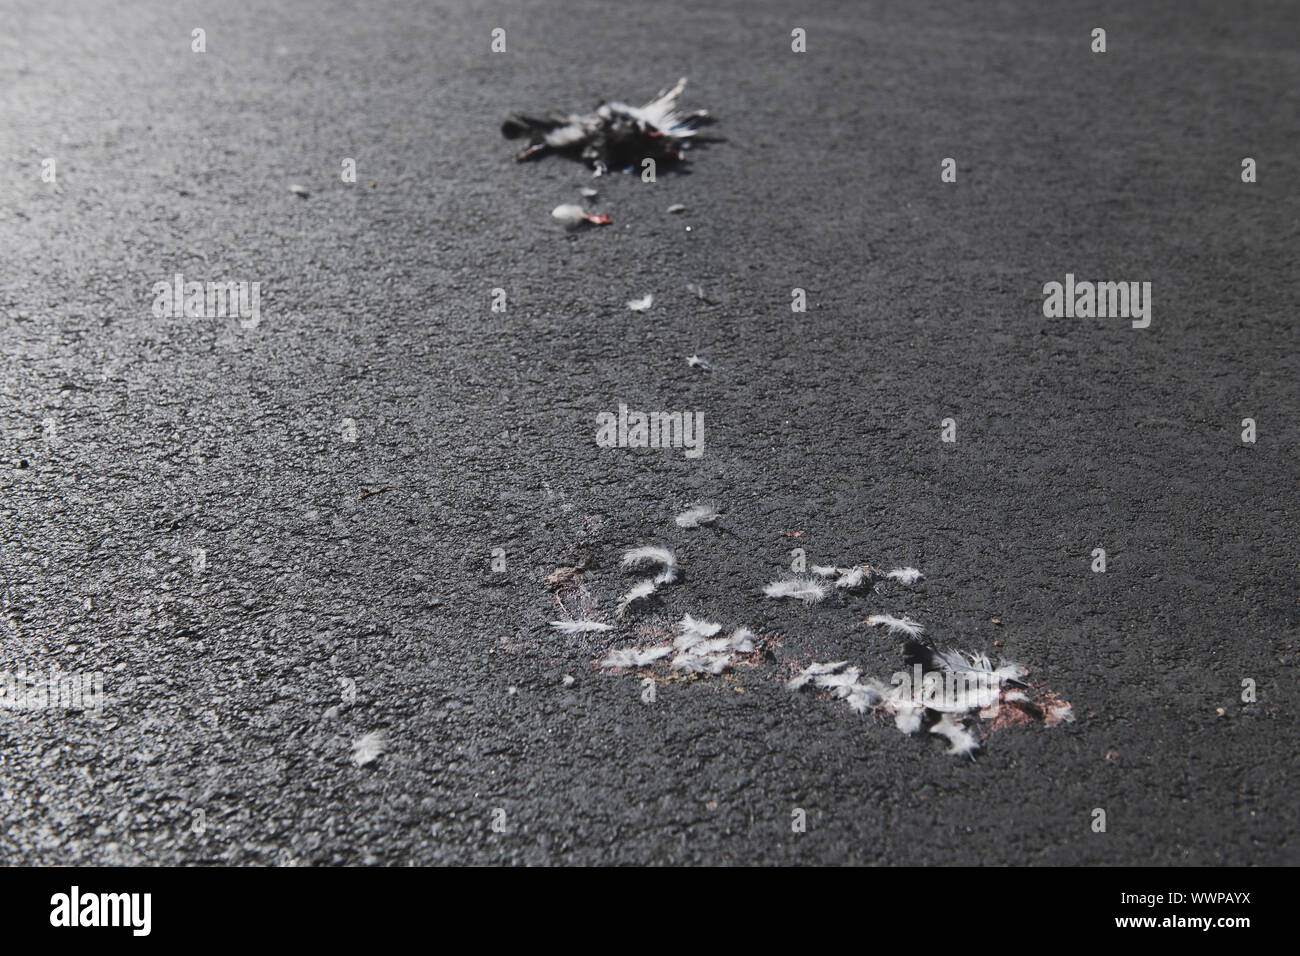 Parts of dead dove lying on the pavement. Pigeon killed by a car. Bird's blood and feathers smashed on the asphalt. Stock Photo